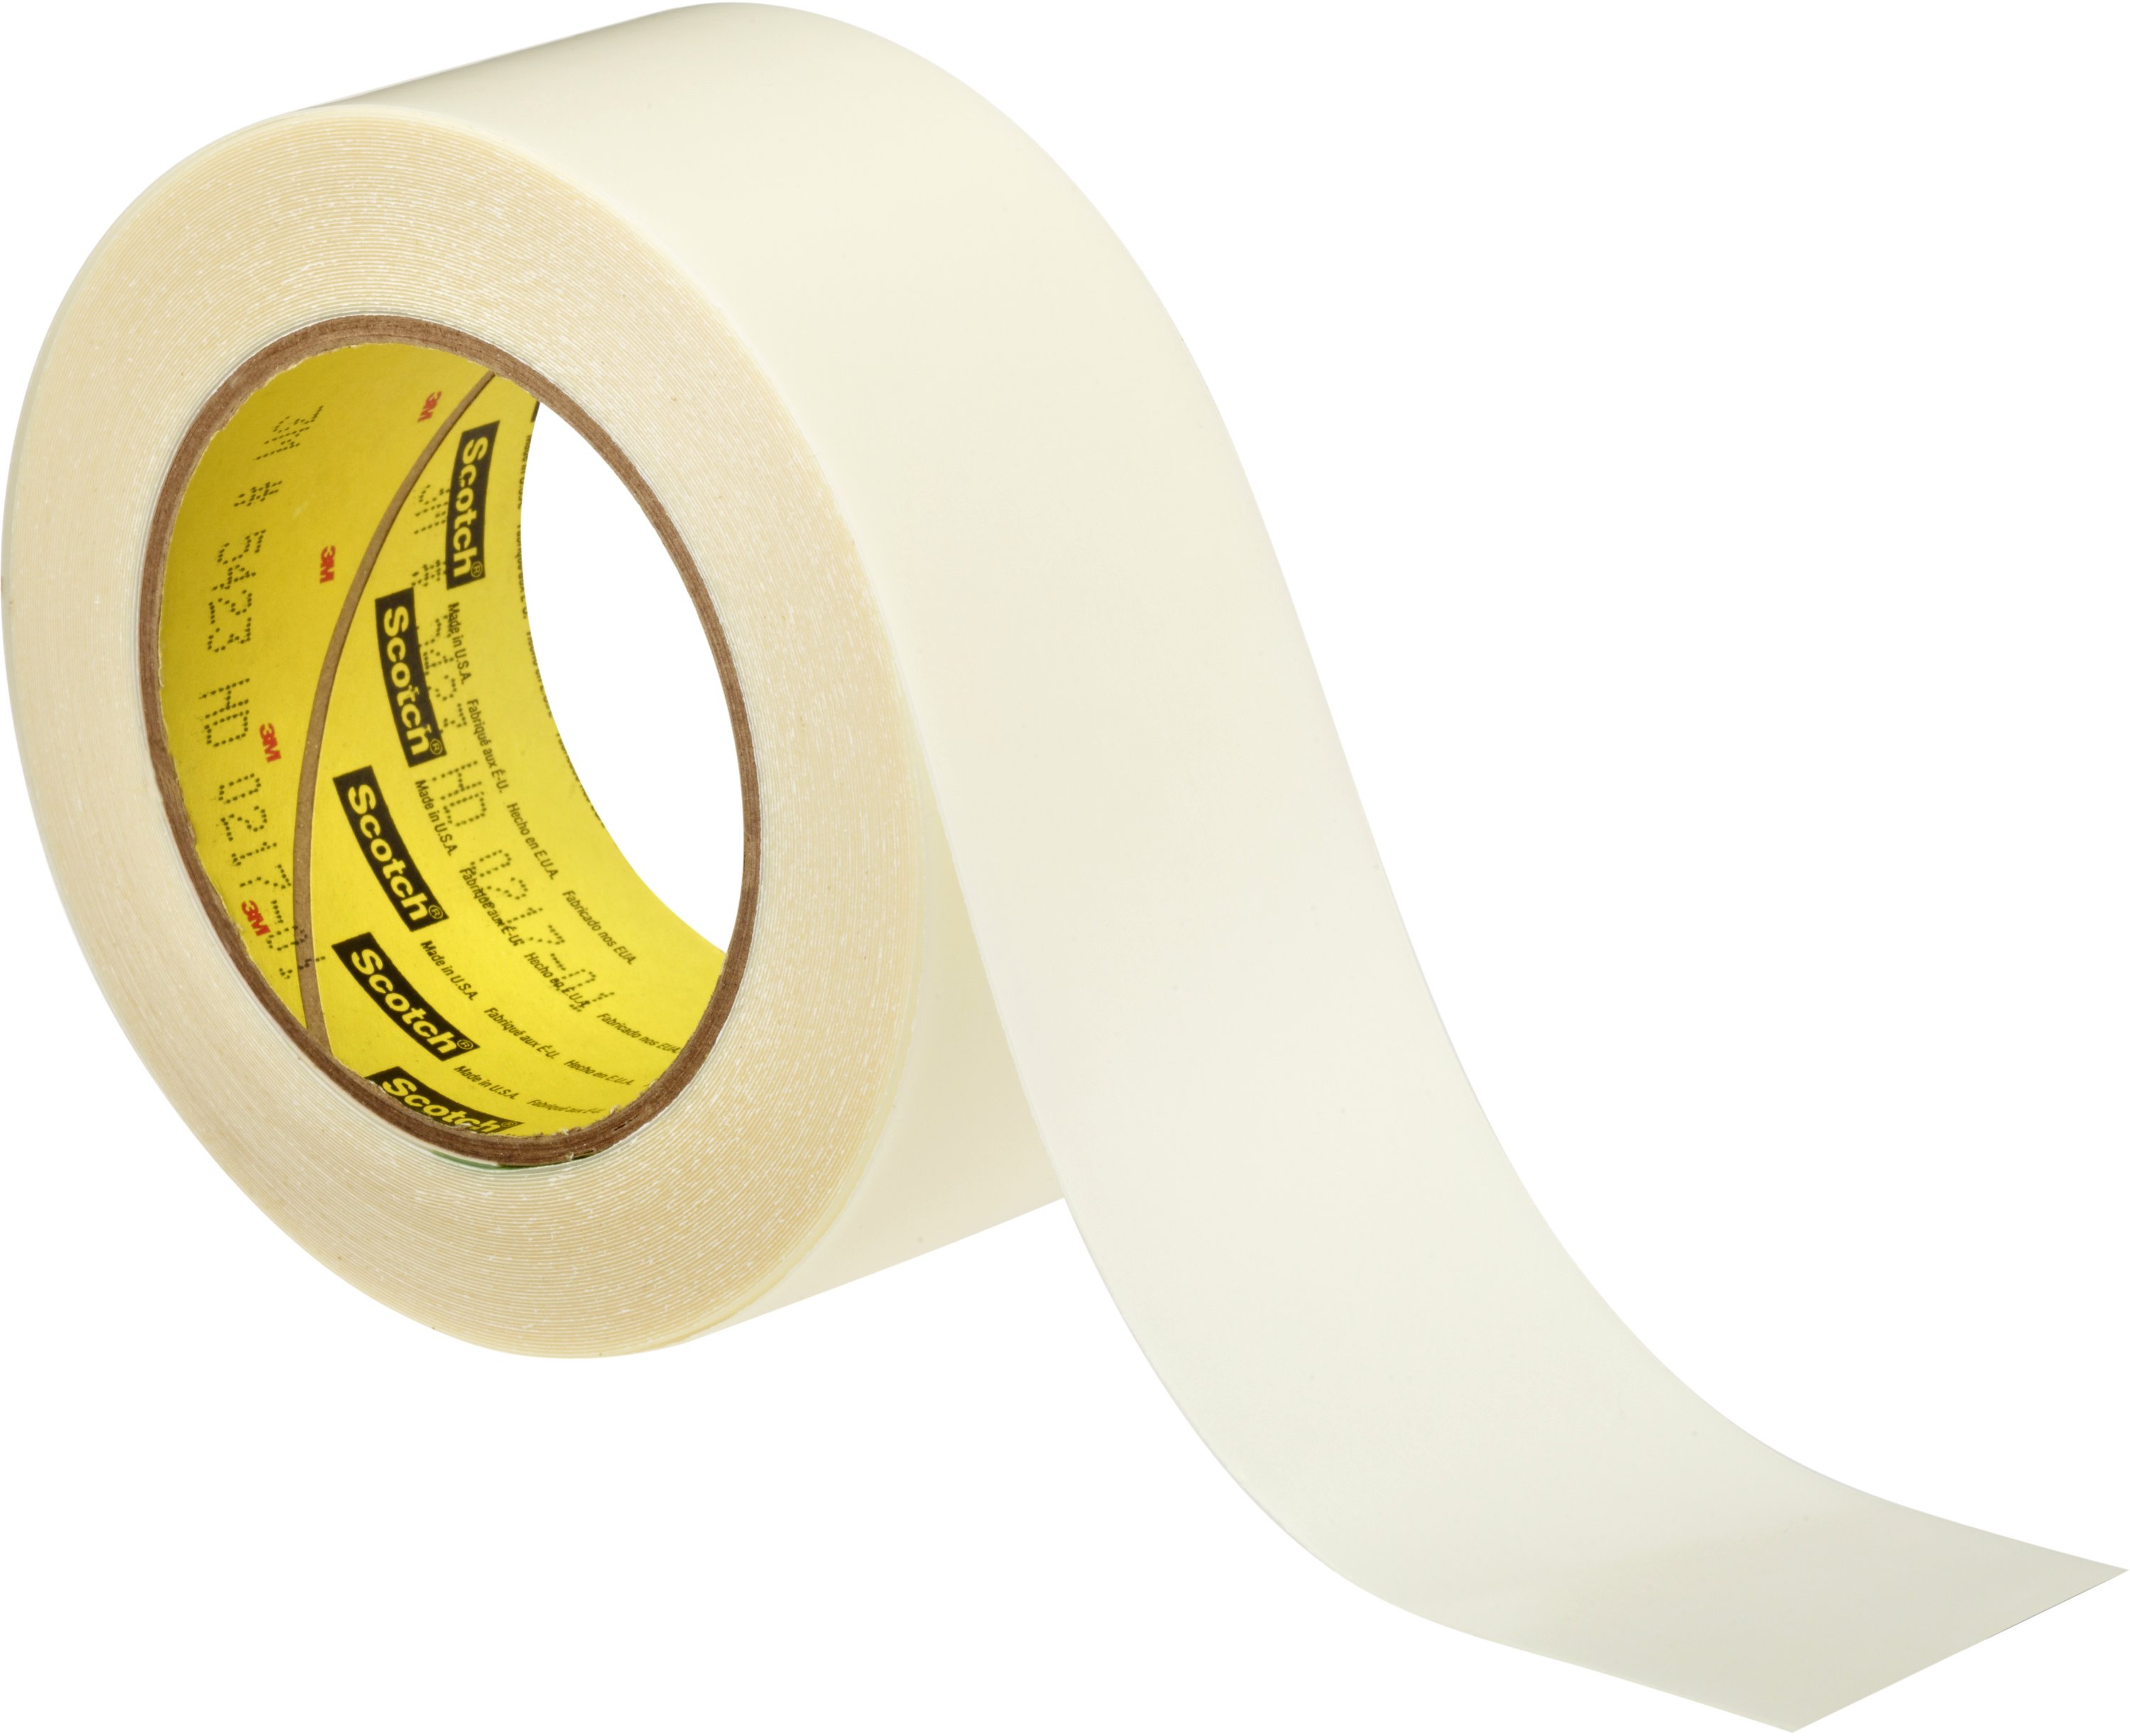 The effectiveness of 3M™ UHMW-PE Film Tape 5423 lies in its Ultra-High Molecular Weight polyethylene (UHMW-PE) backing.